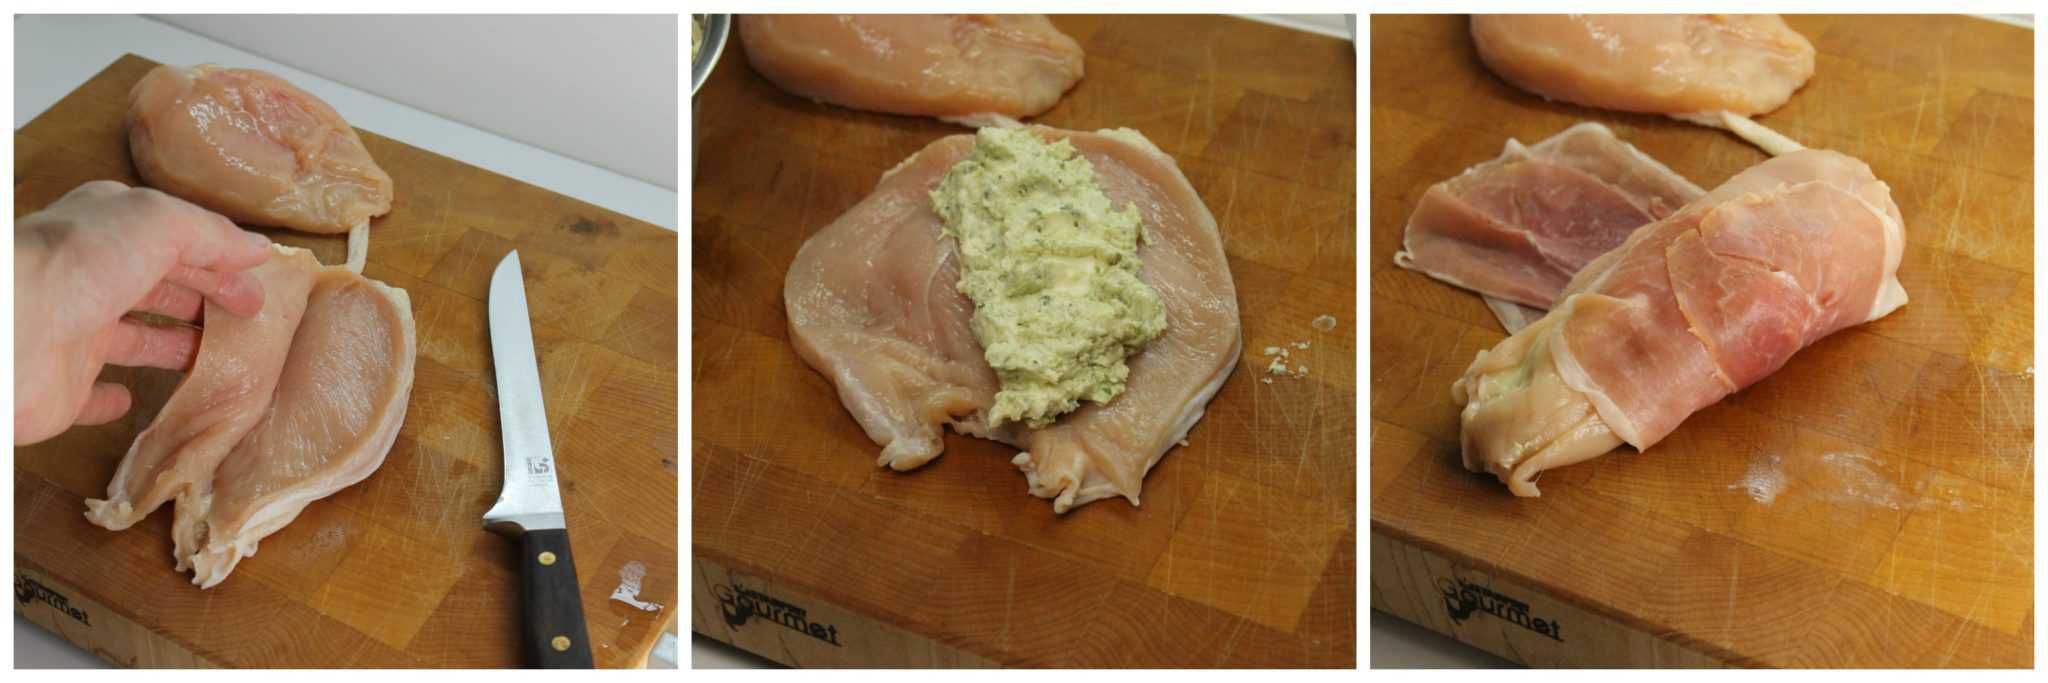 butterflying, stuffing, and wrapping a chicken breast in proscuitto